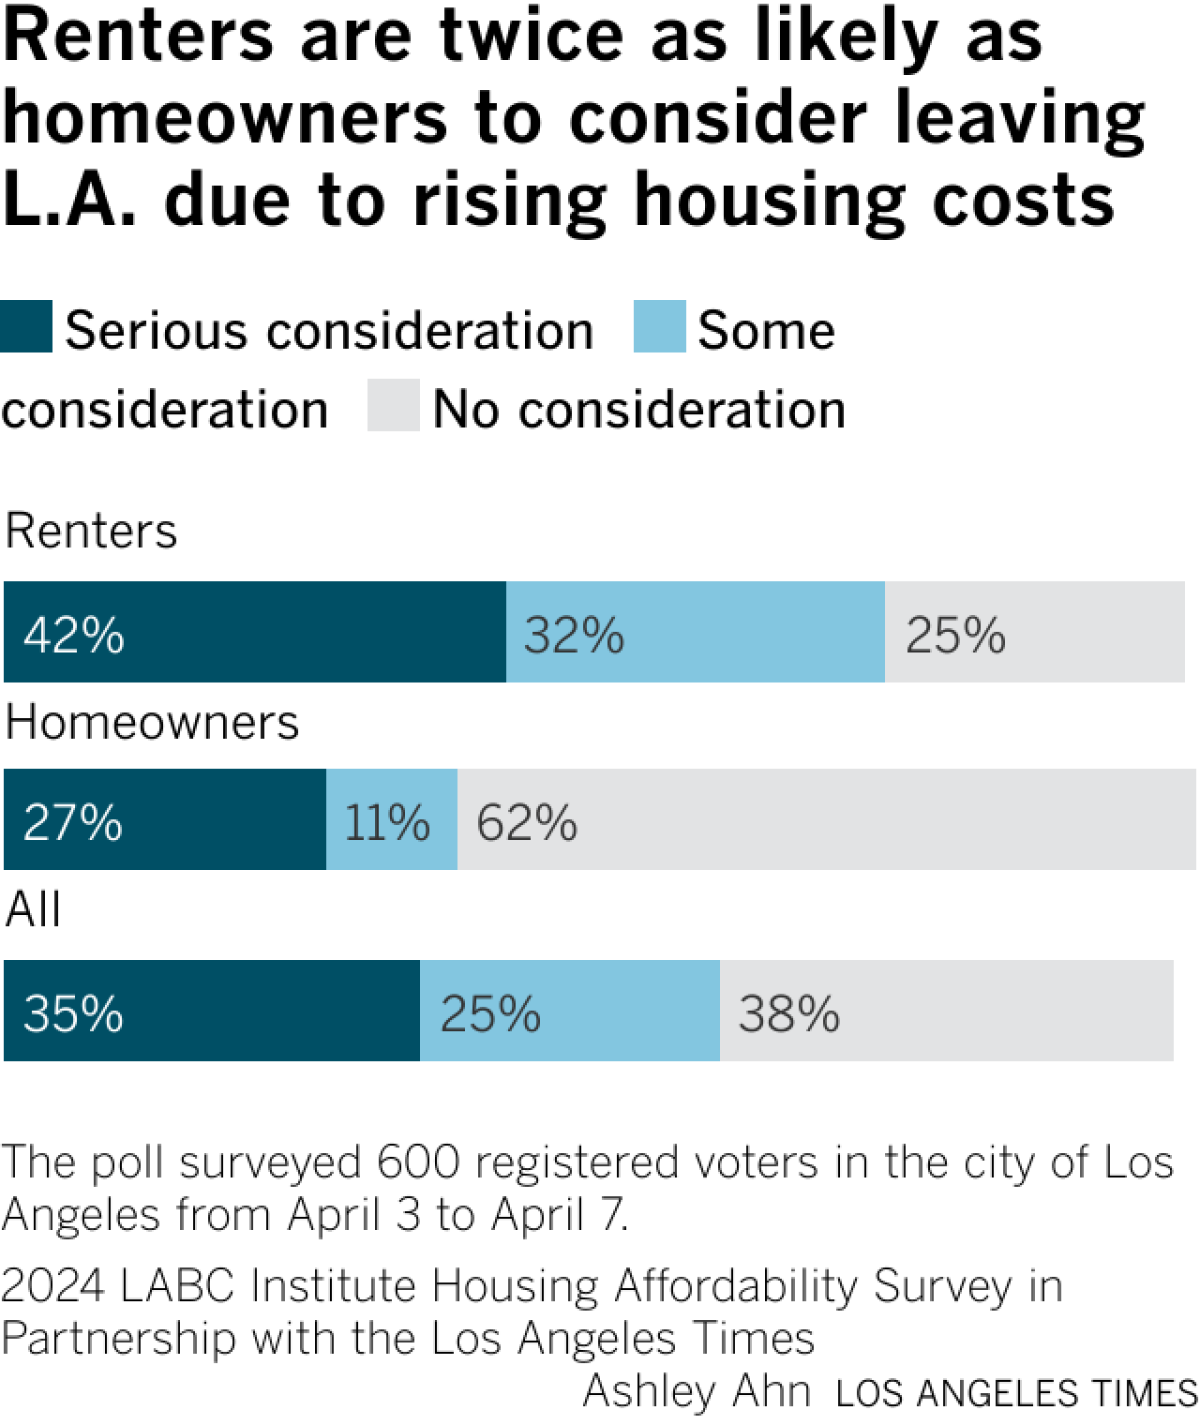 The stacked bar chart shows that 38% of homeowners and 74% of renters have considered leaving Los Angeles due to rising housing costs.